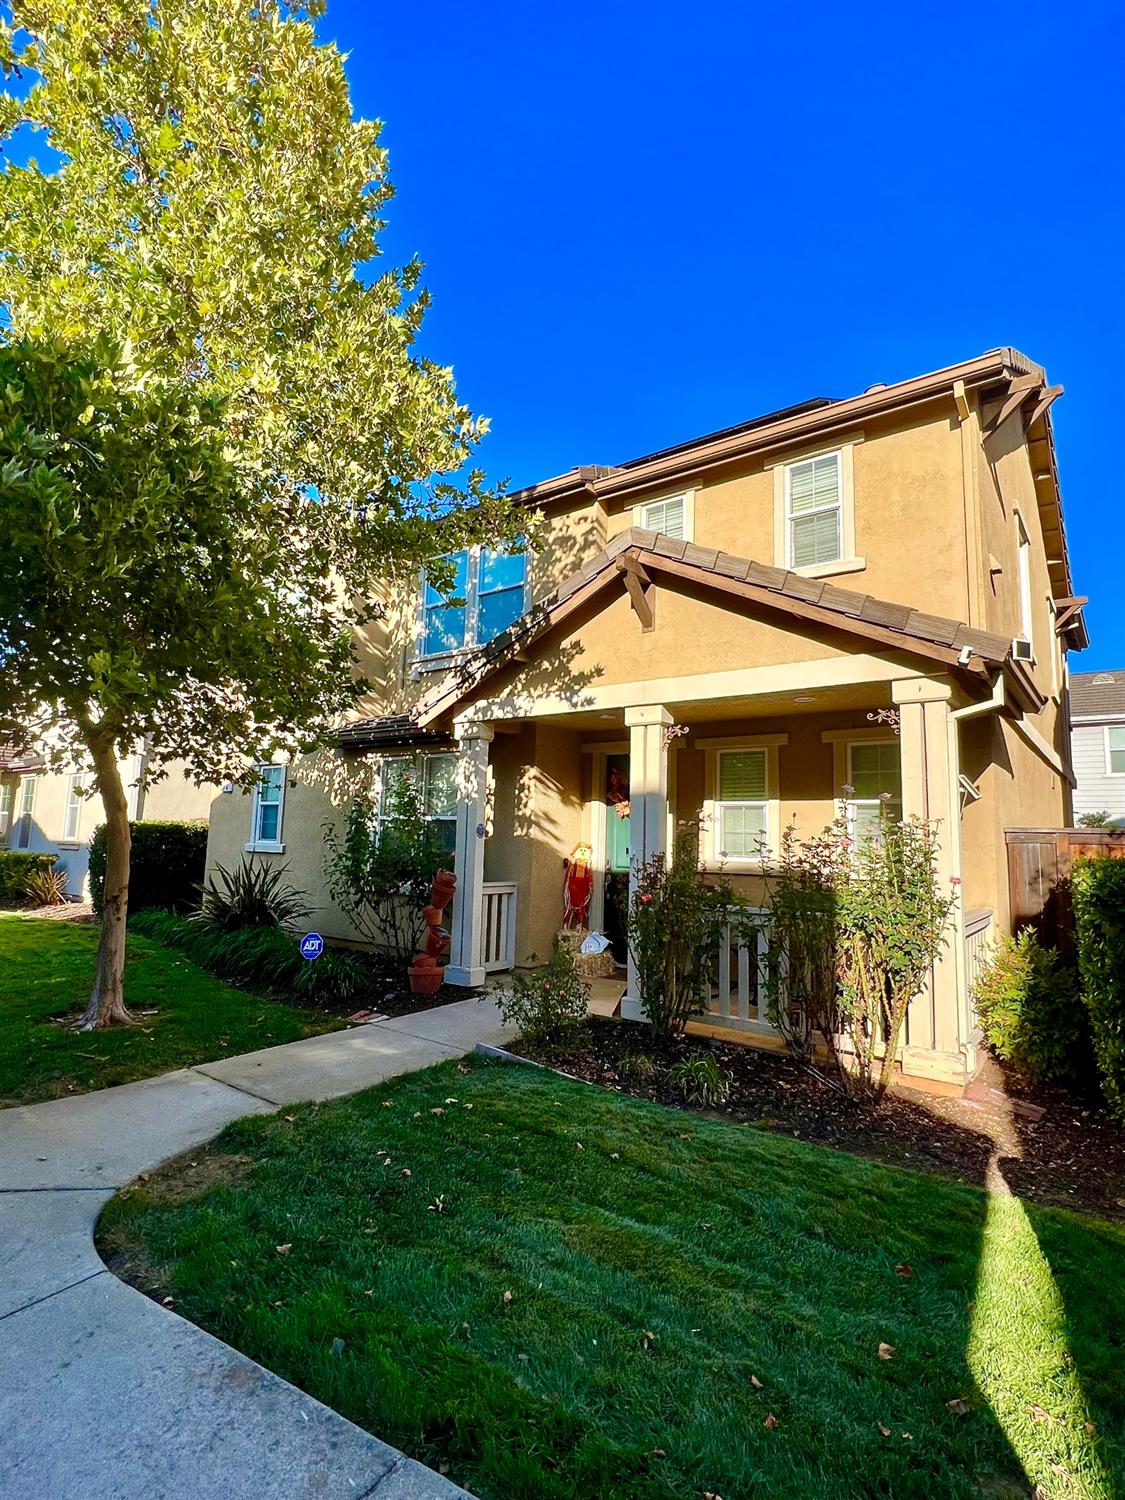 Photo of 24 Crystalwood Cir in Lincoln, CA